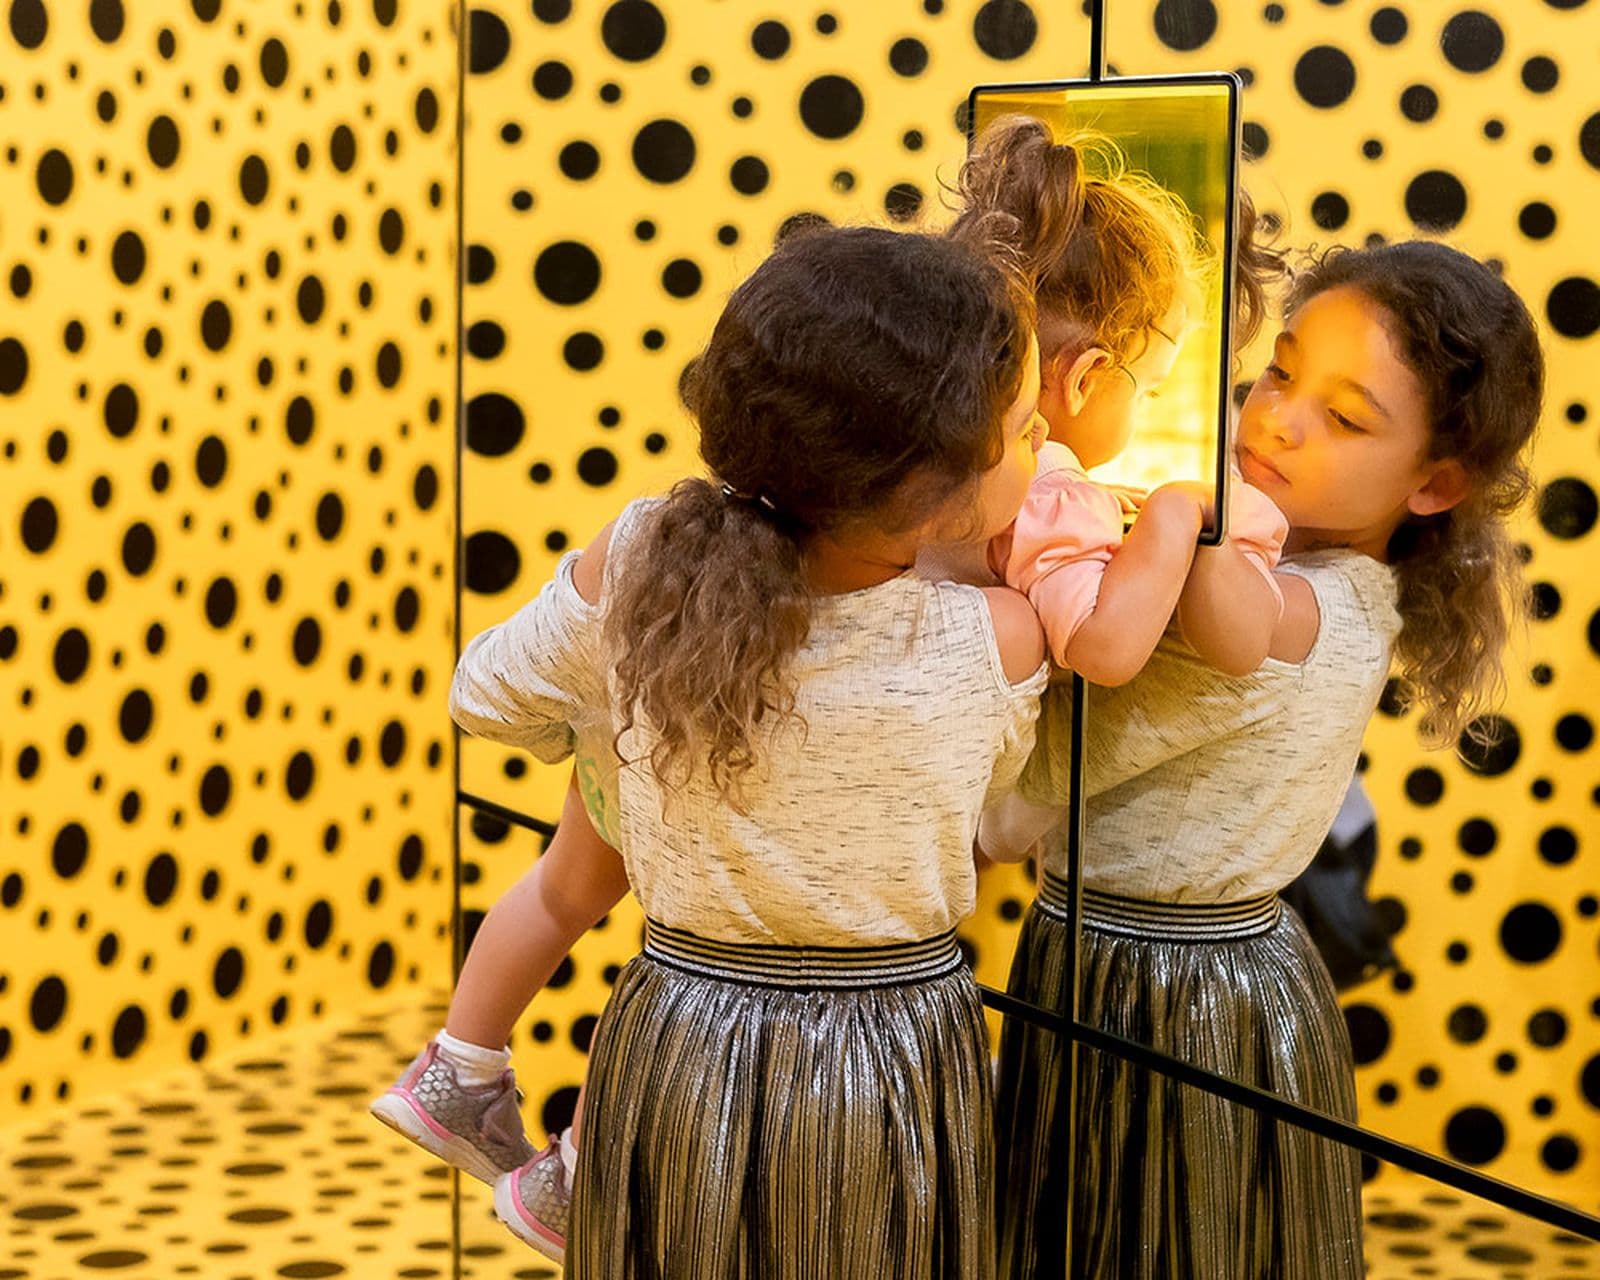 Two young visitors take a peek inside the camouflaged mirror box